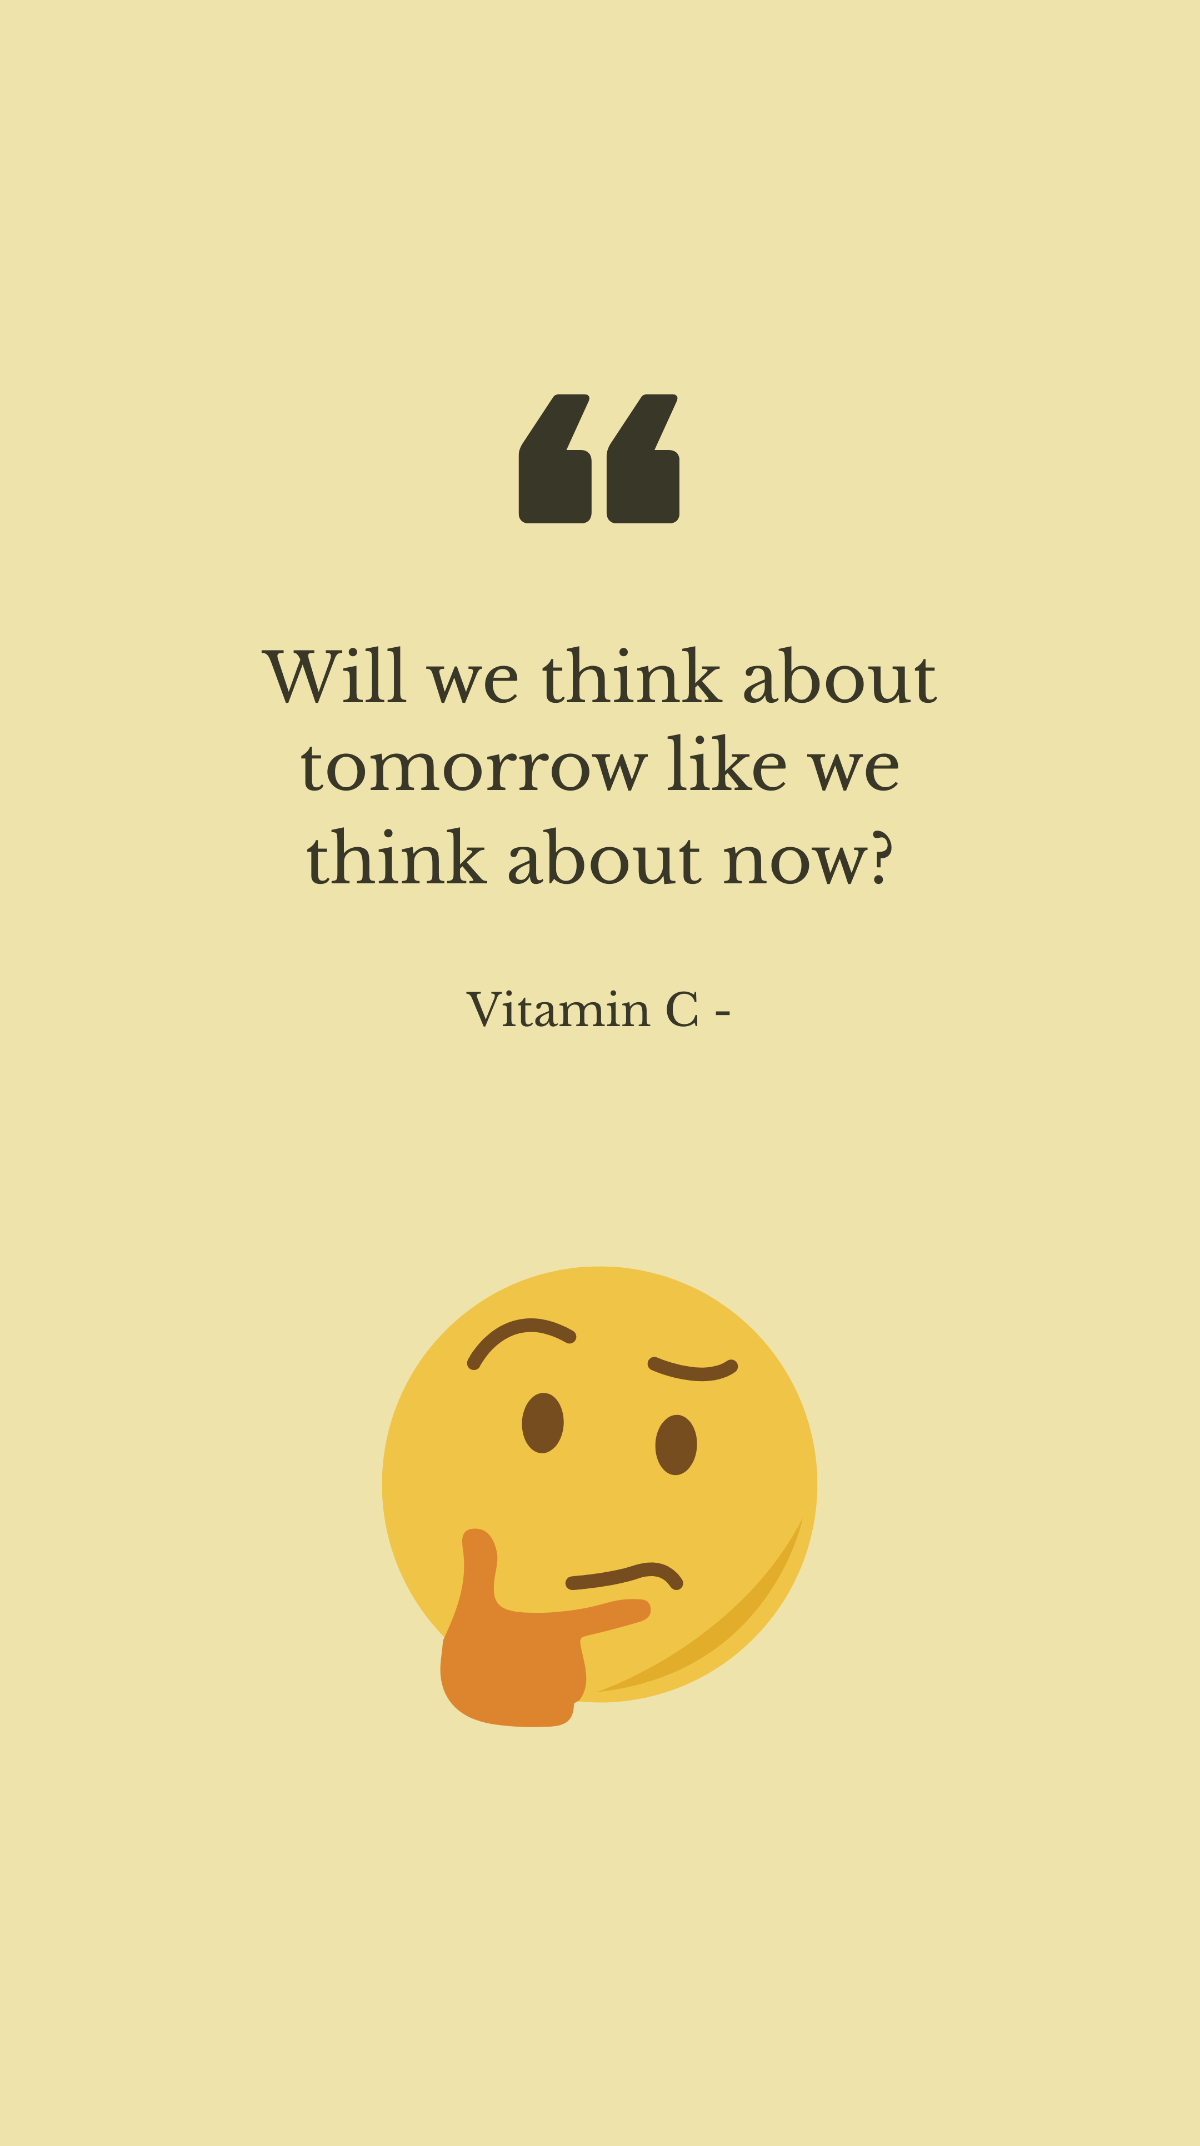 Free Vitamin C - Will we think about tomorrow like we think about now? Template